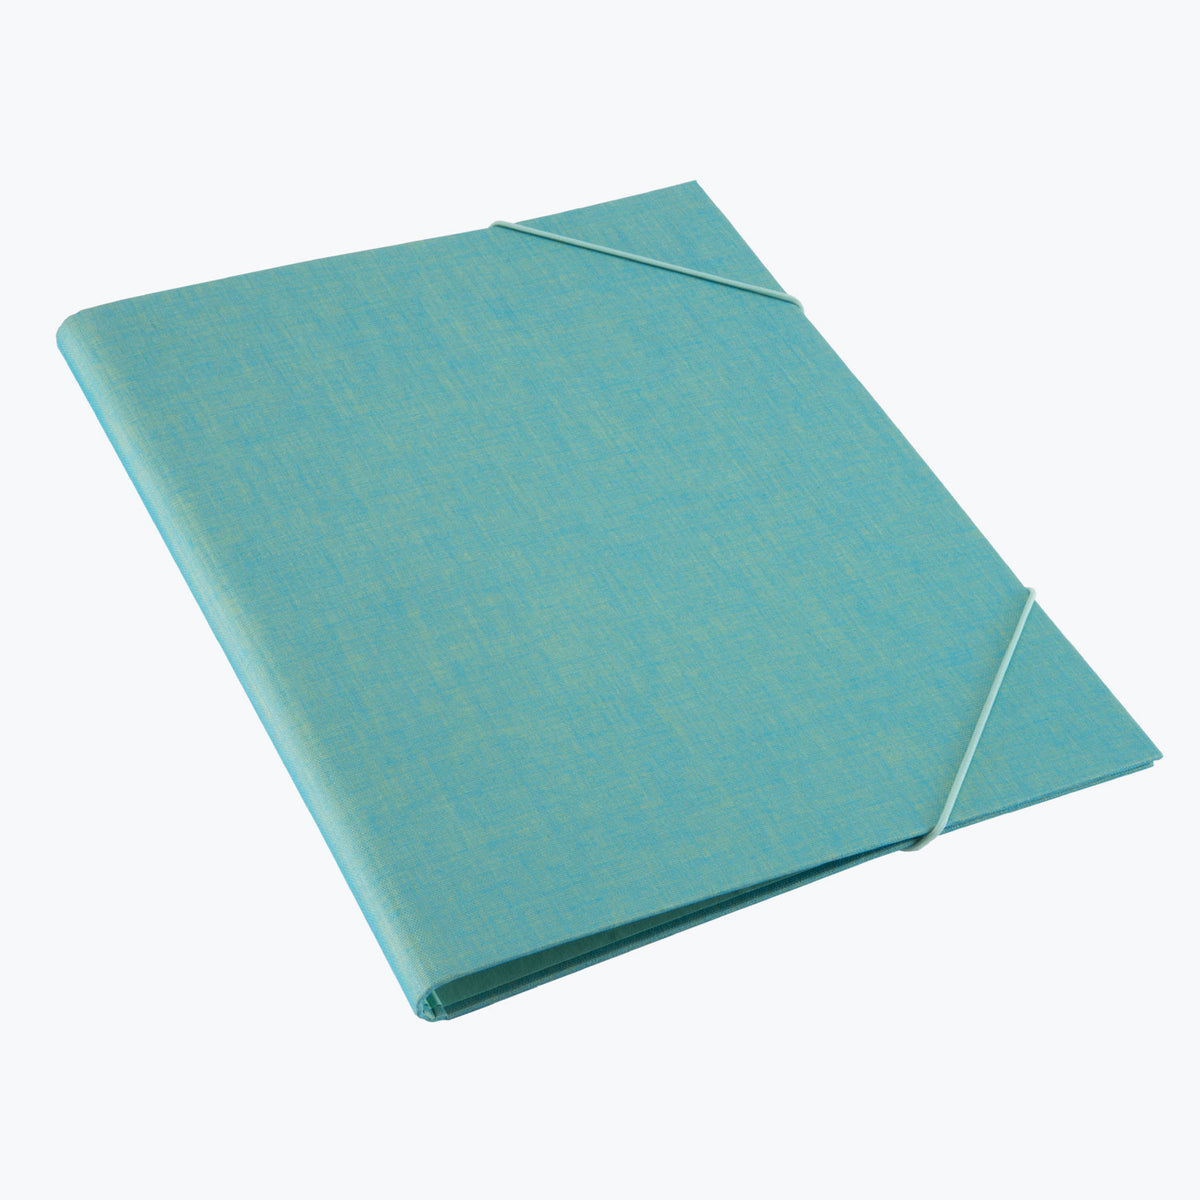 Bookbinders Design - Folder - A3 - Turquoise <Outgoing>